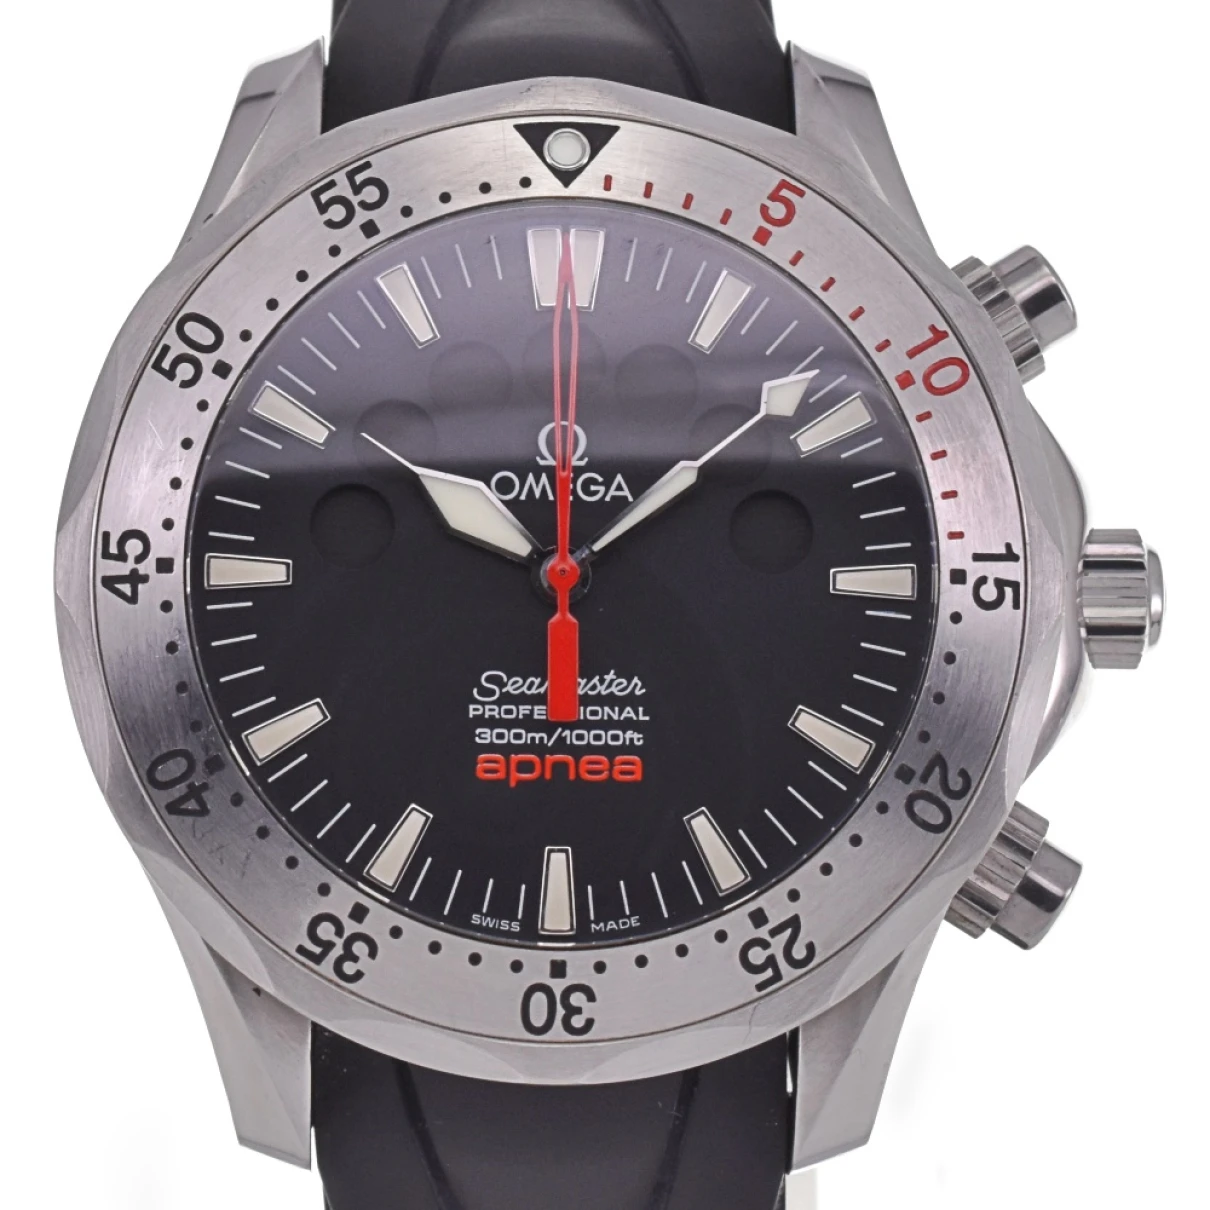 Pre-owned Omega Seamaster Watch In Black